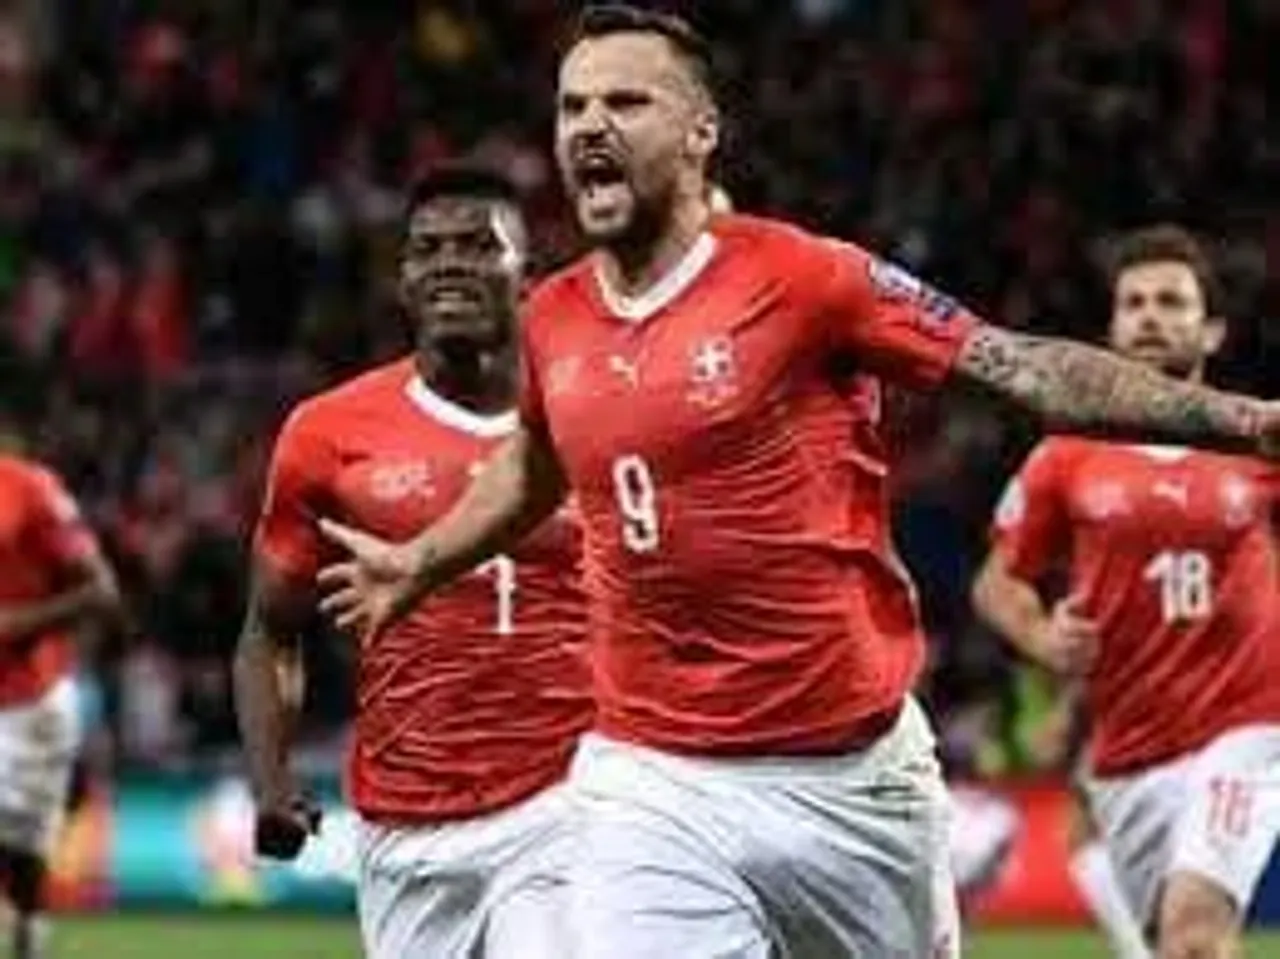 Switzerland vs Cameroon: 2022 World Cup, Group Stage Match Preview and Dream11 Predictions